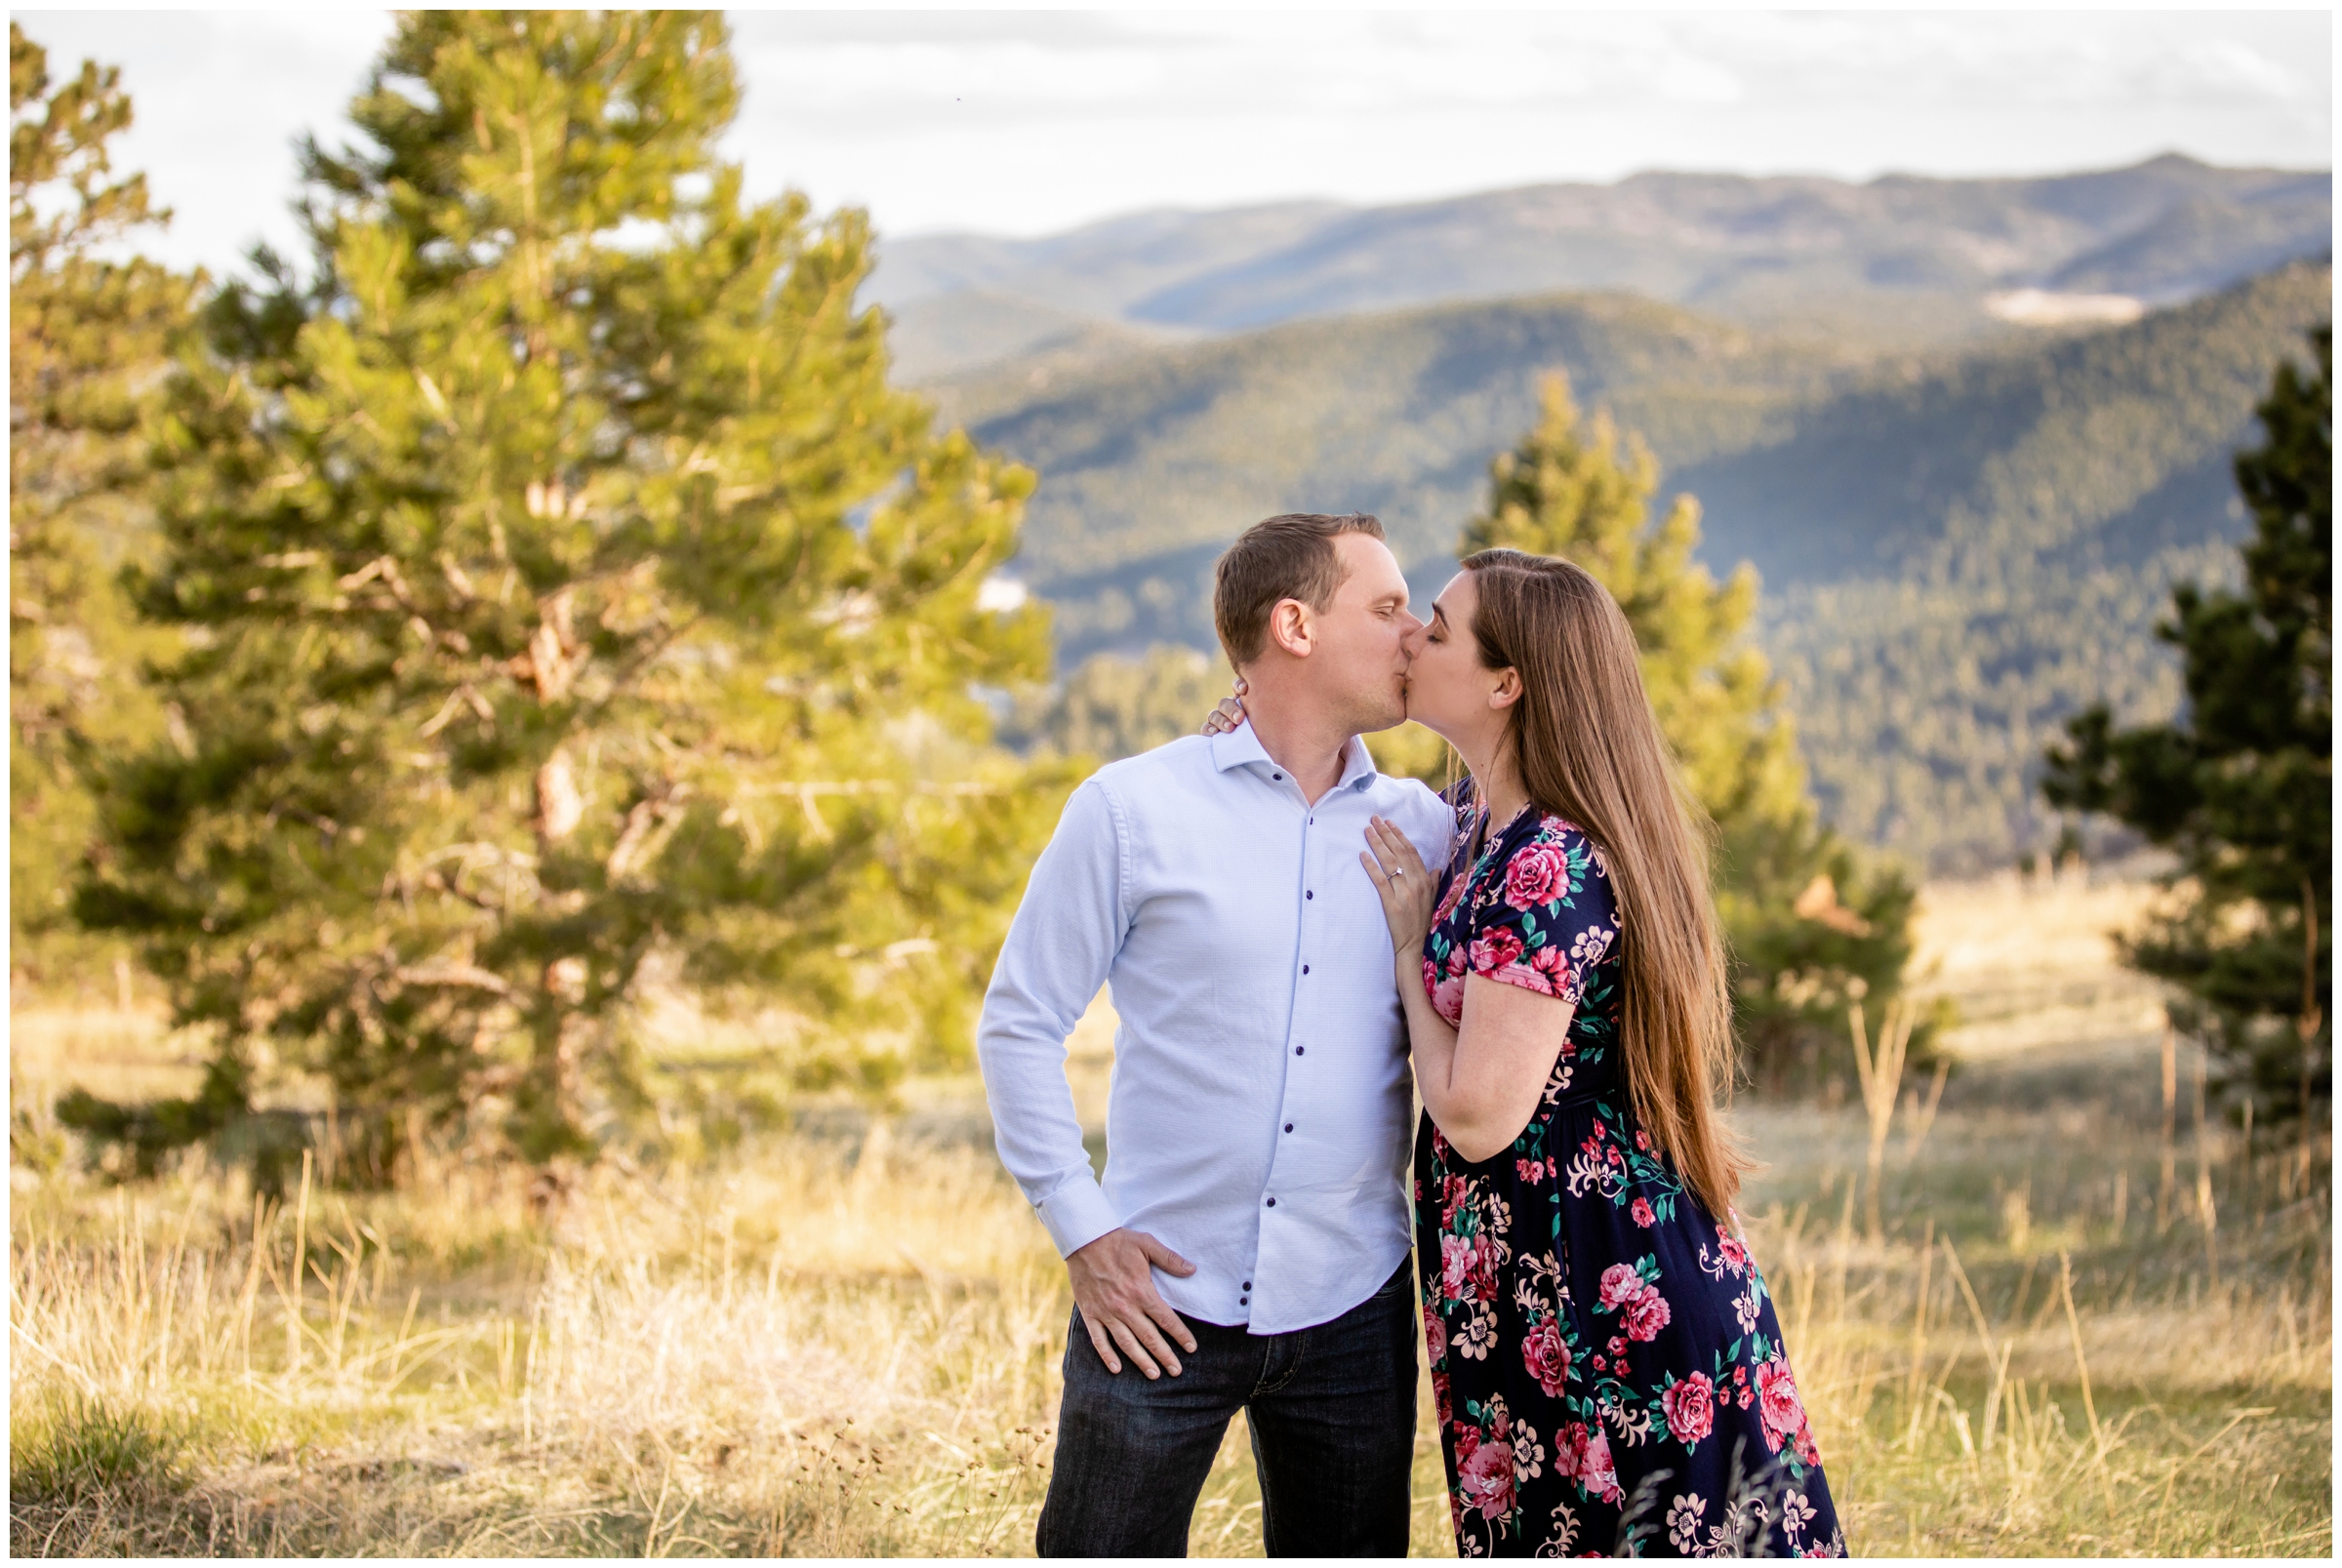 Spring engagement photos in Colorado at Mount Falcon West by mountain portrait photographer Plum Pretty Photography.